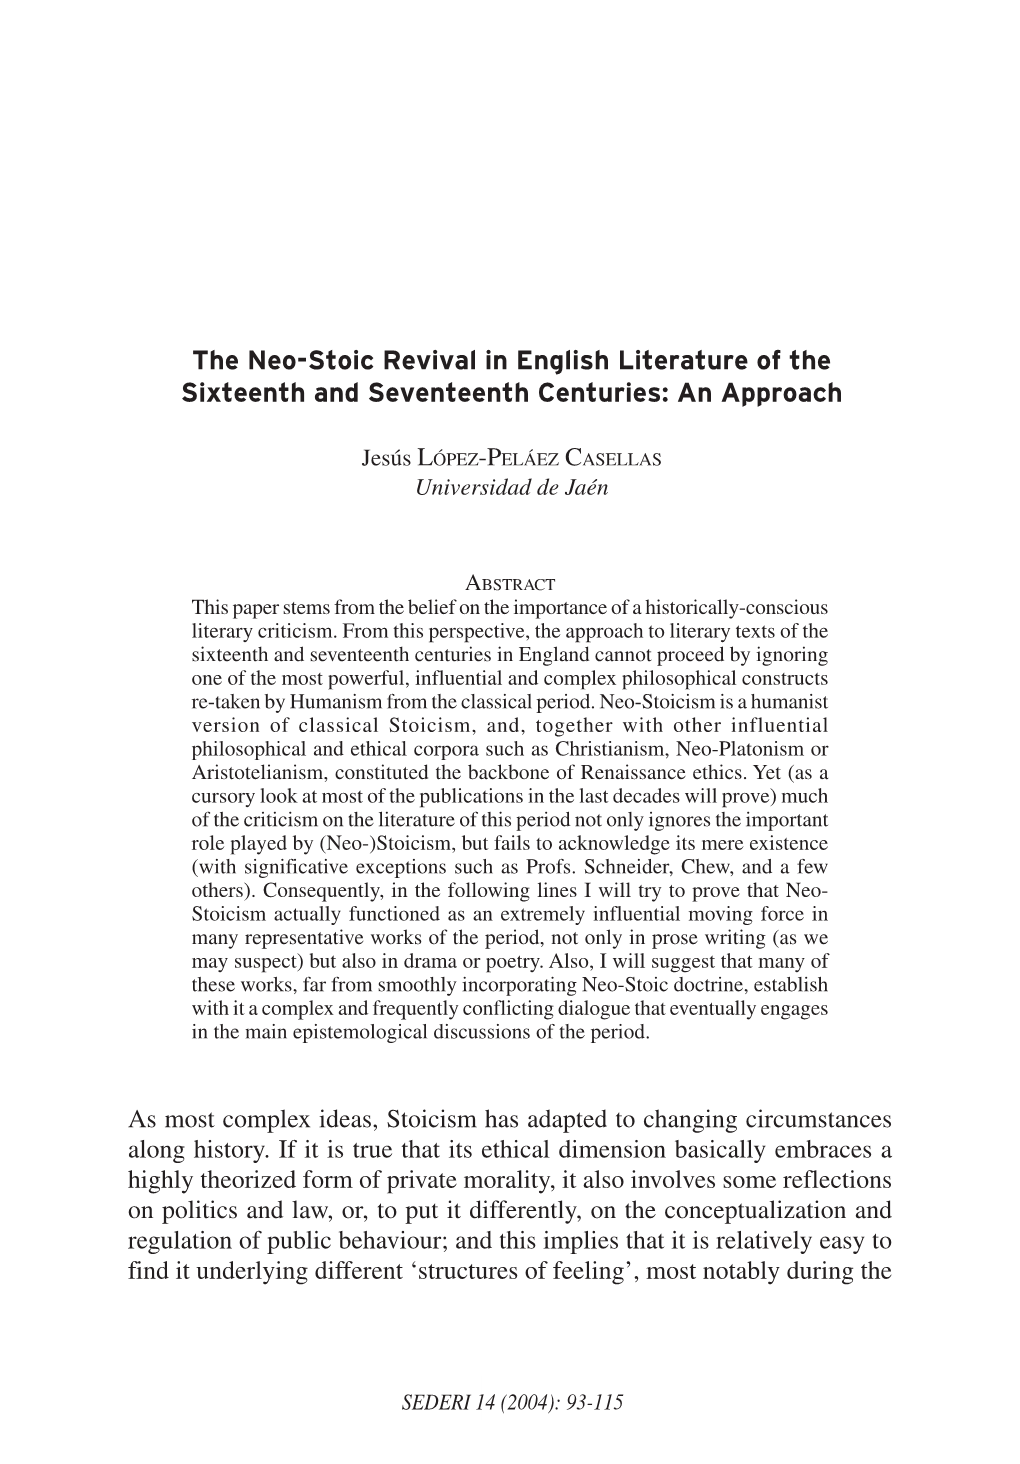 The Neo-Stoic Revival in English Literature of the Sixteenth and Seventeenth